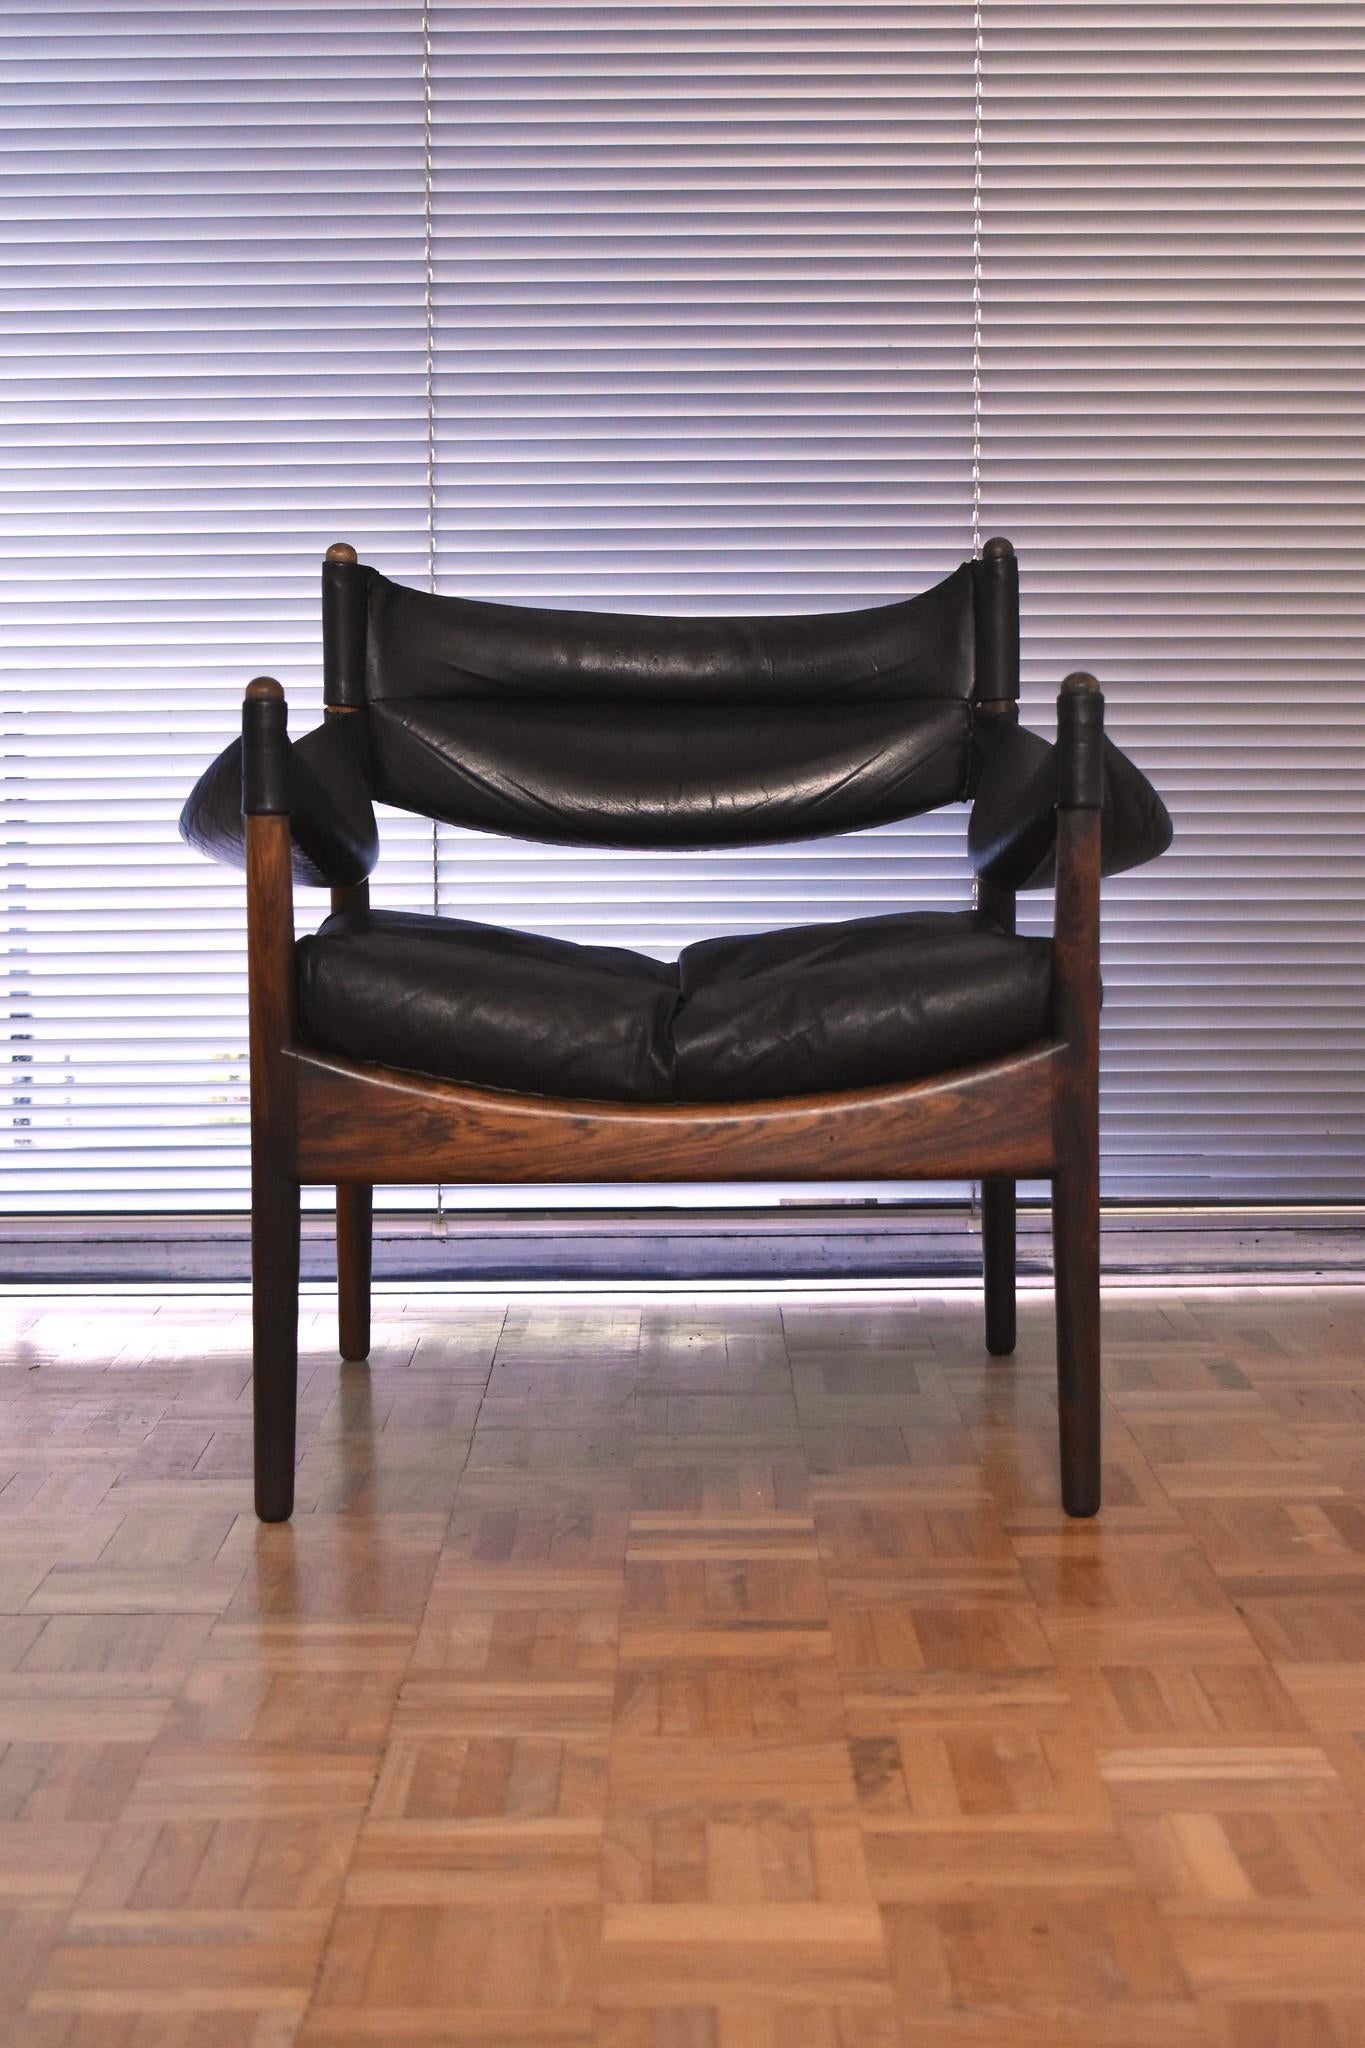 A very eye-catching Danish design classic. There is nothing else like the Modus chair. A beautifully constructed and detailed chair. Leather sling arms suspended between the solid rosewood frame with a loose feather filled seat